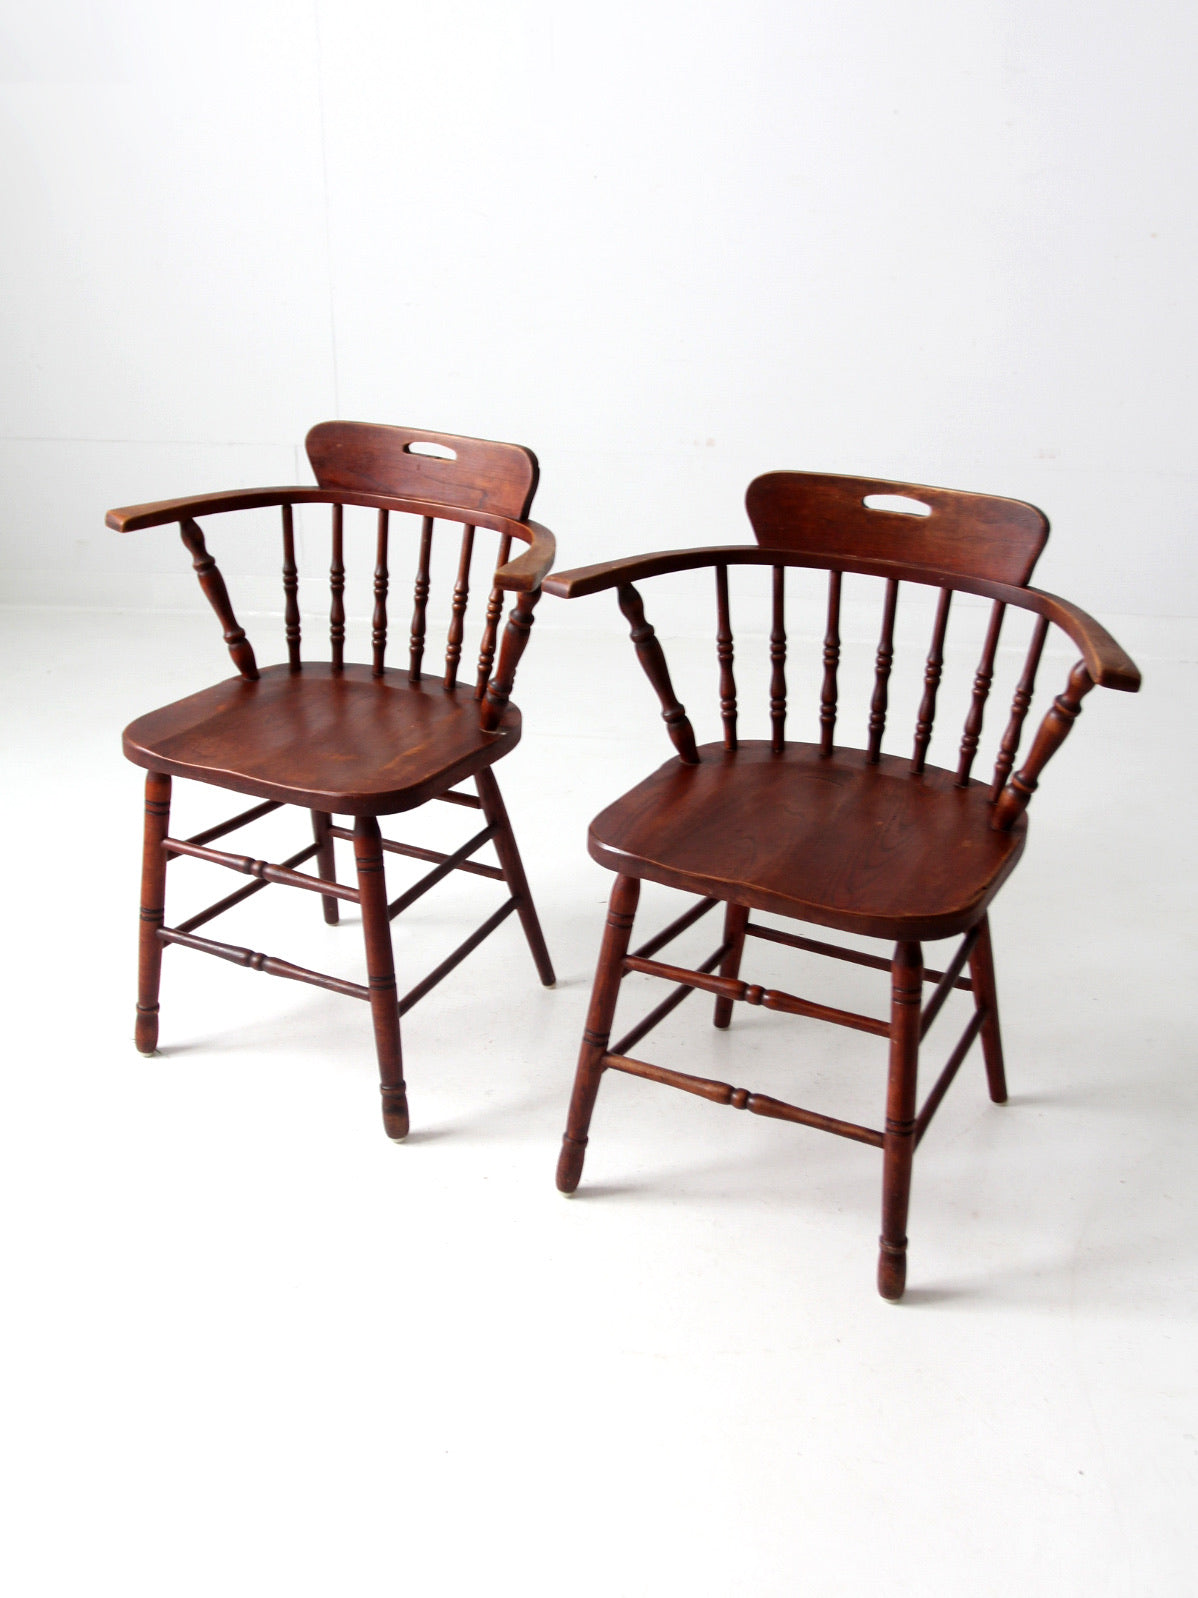 vintage captian's chairs pair